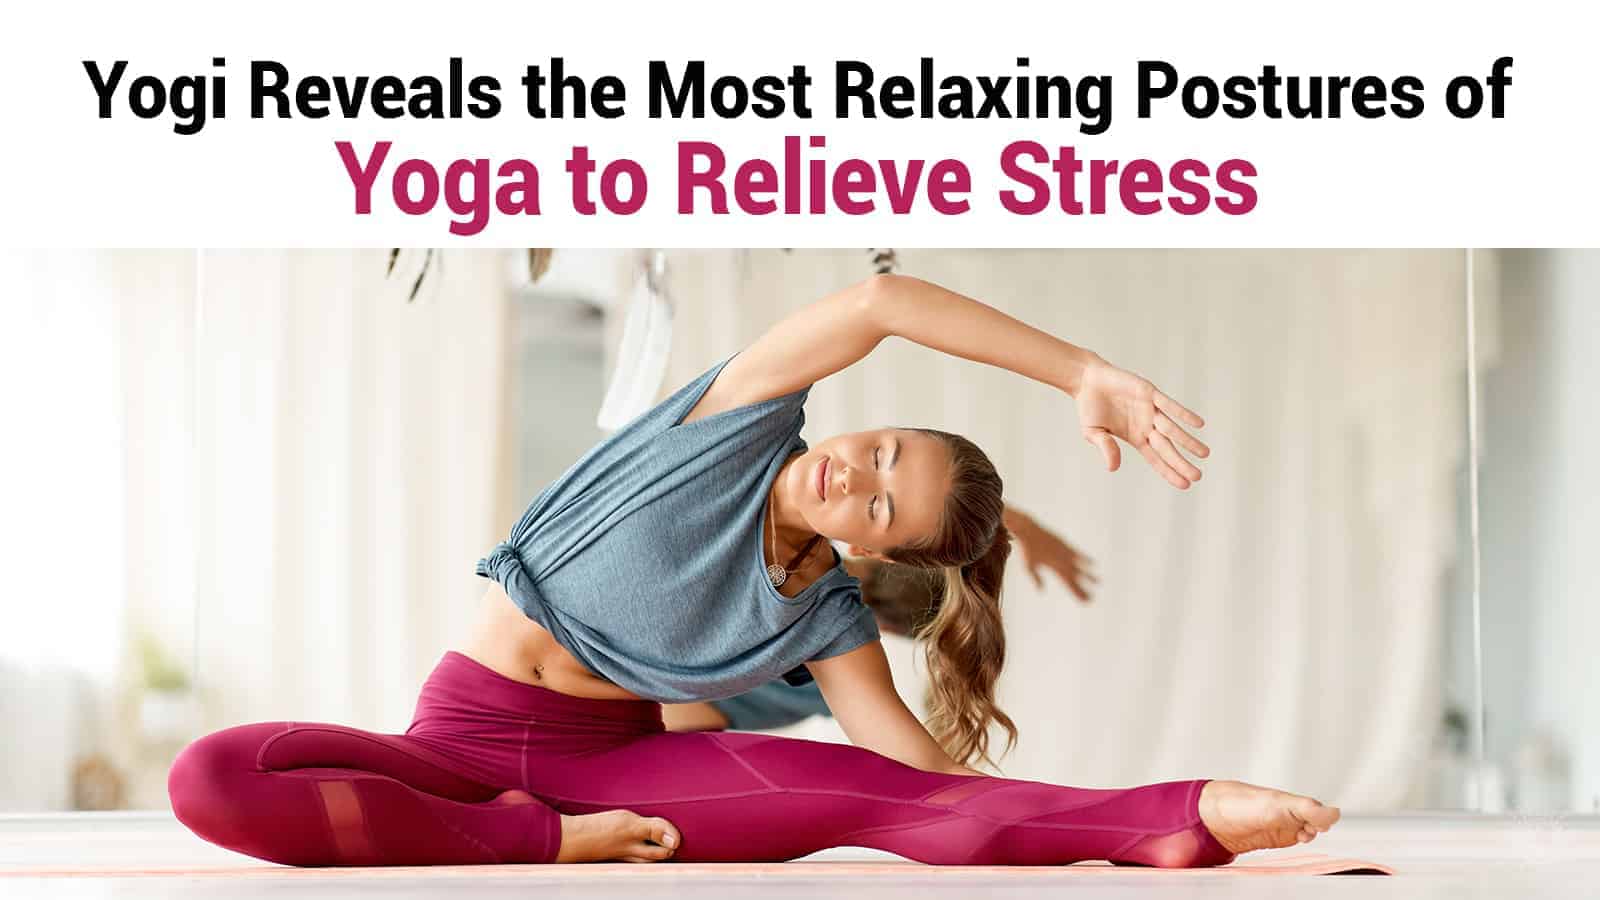 Yogi Reveals the Most Relaxing Postures of Yoga to Relieve Stress